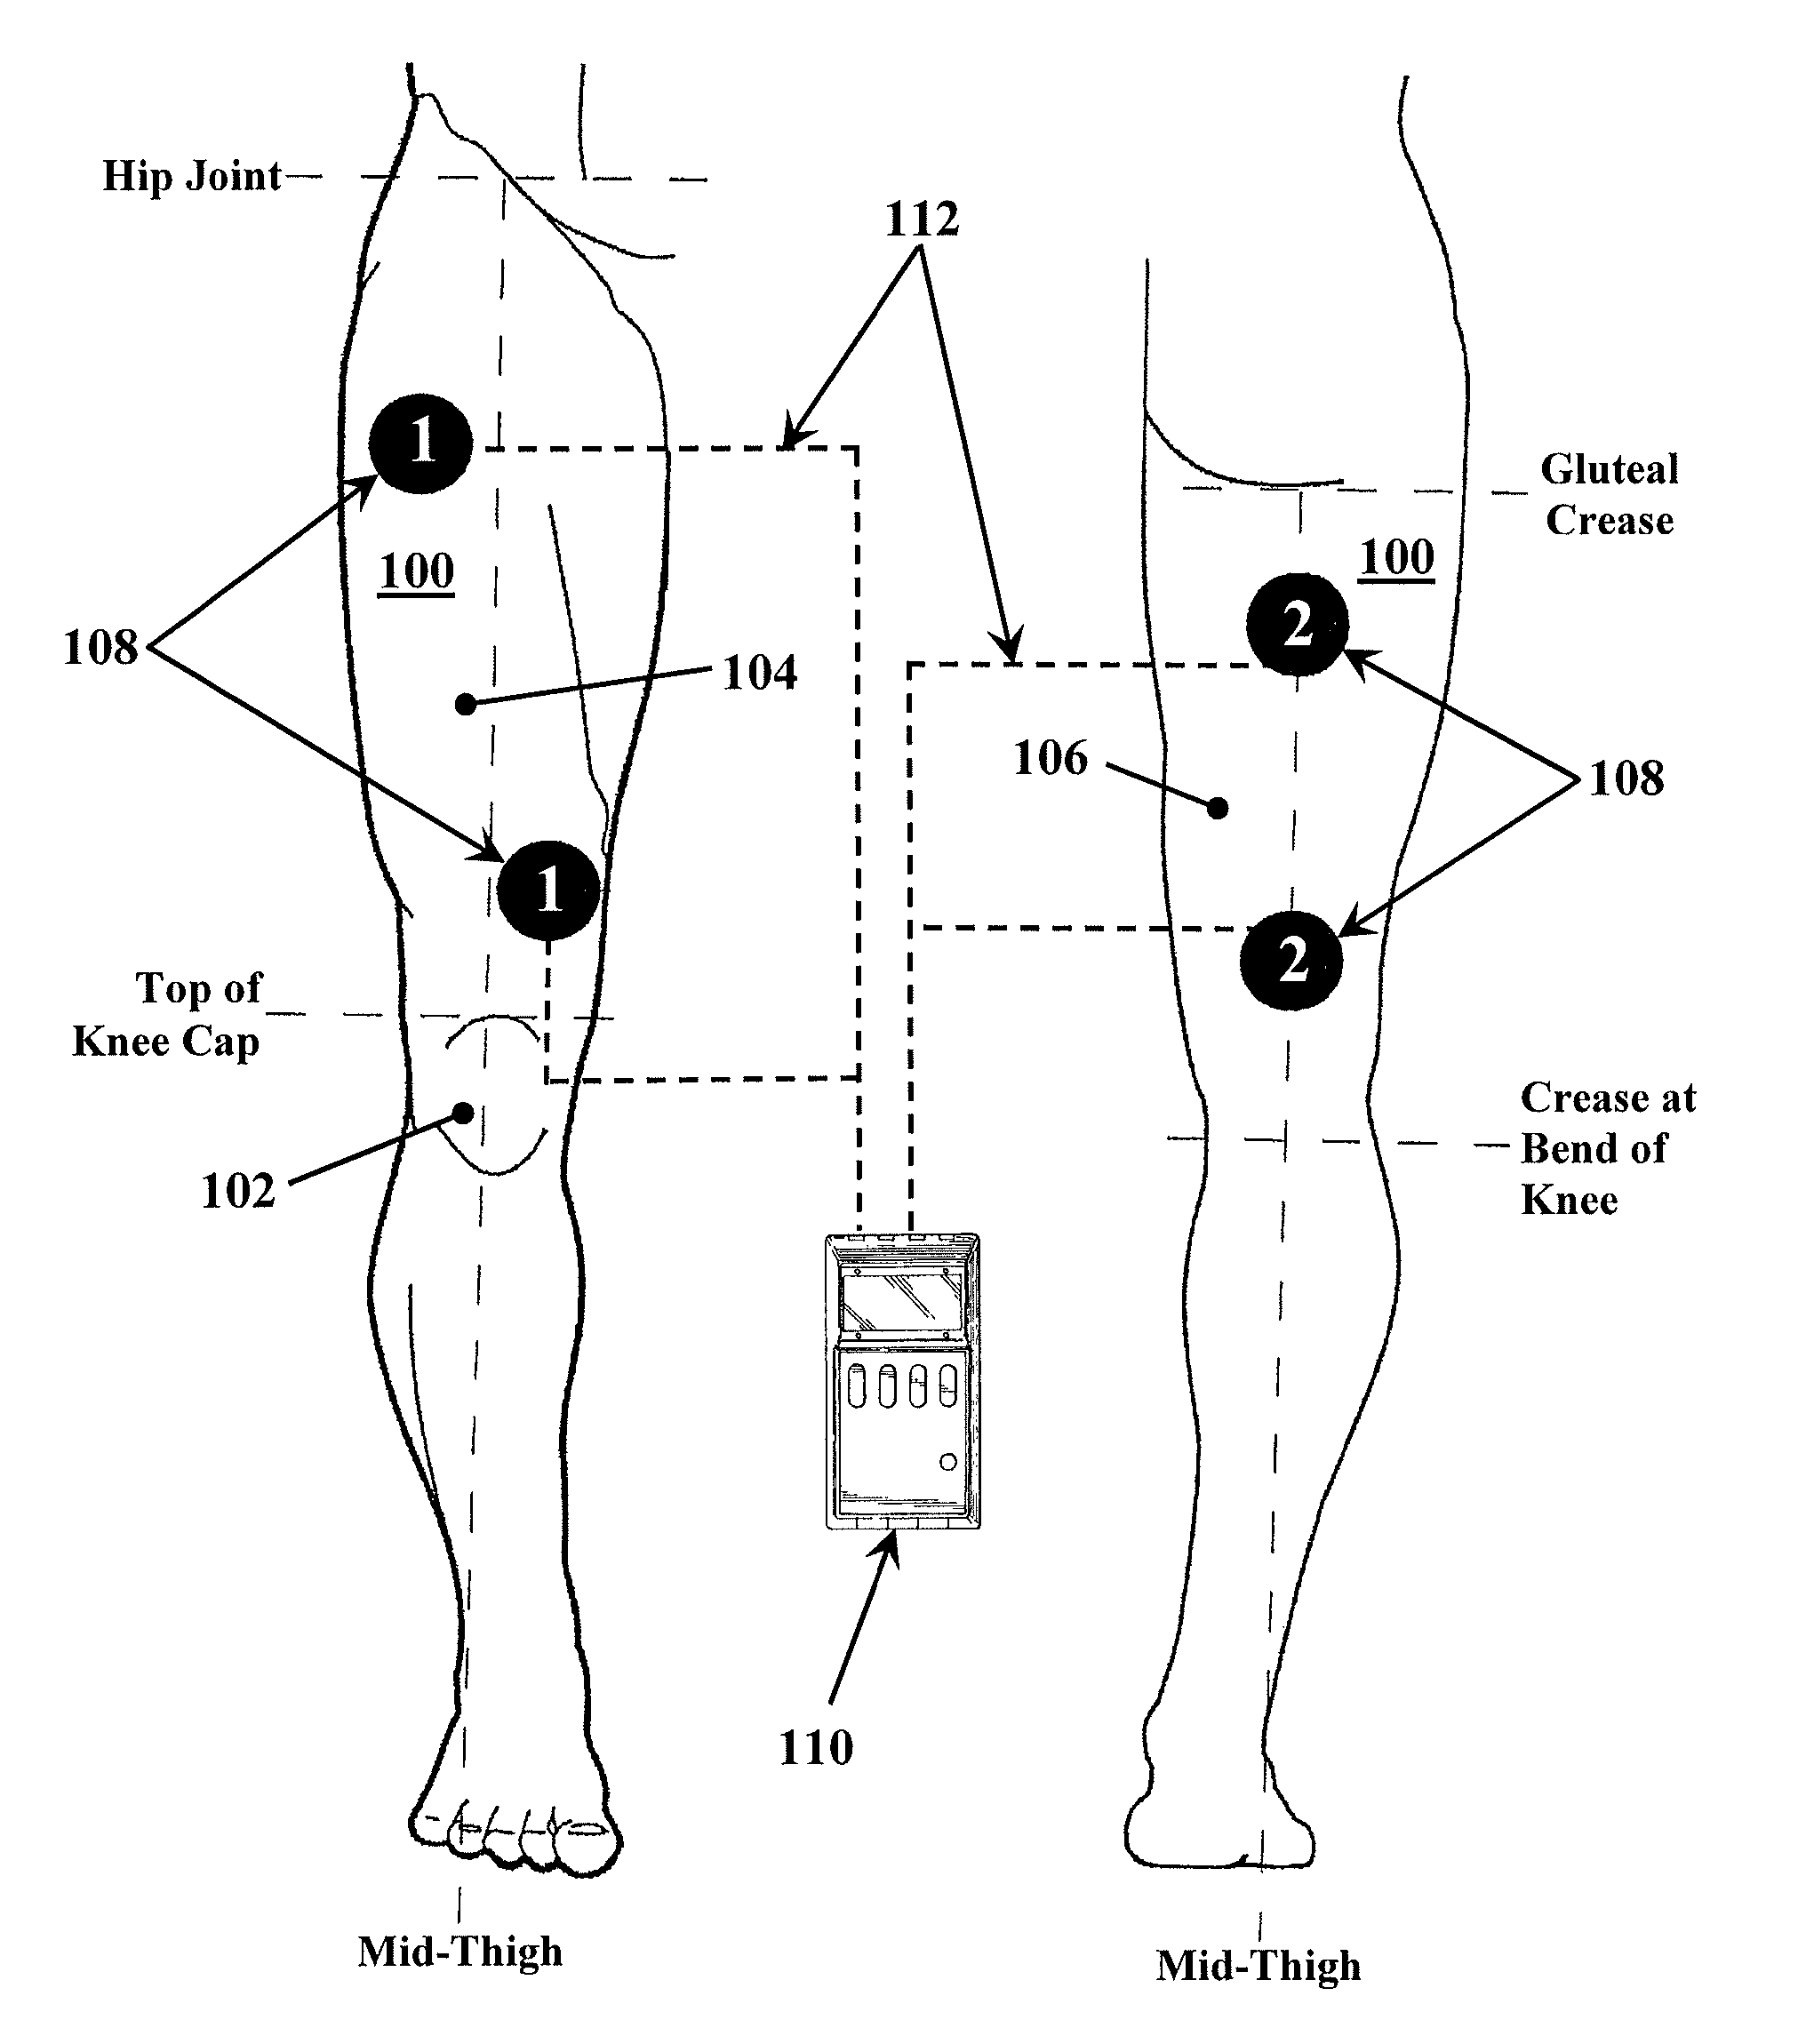 Apparatus and method for stabilizing, improving mobility, and controlling cartilage matrix degradation of weight-bearing articular joints